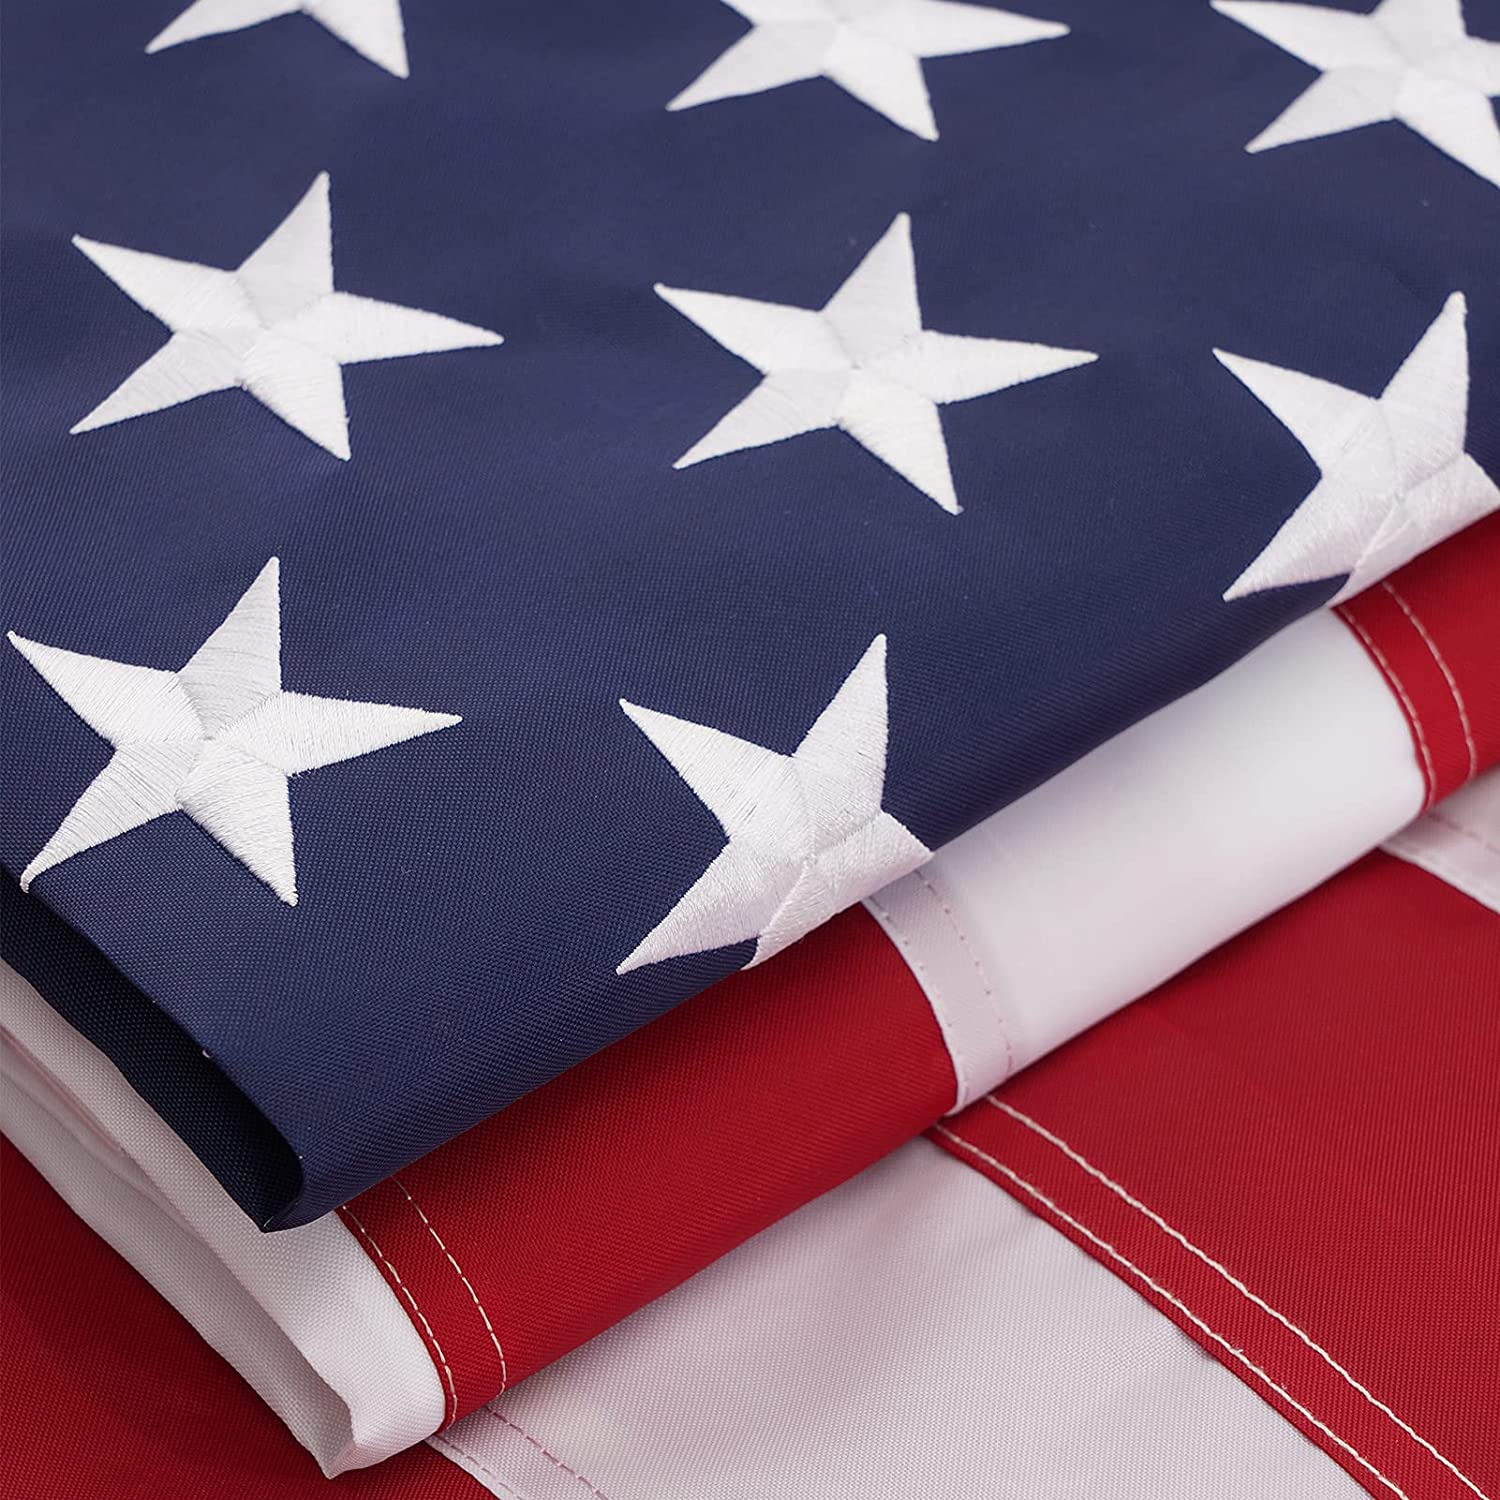 TOPFLAGS 5X8 Ft American Flag Large US Flags Heavy Duty Embroidered Stars, Sewn